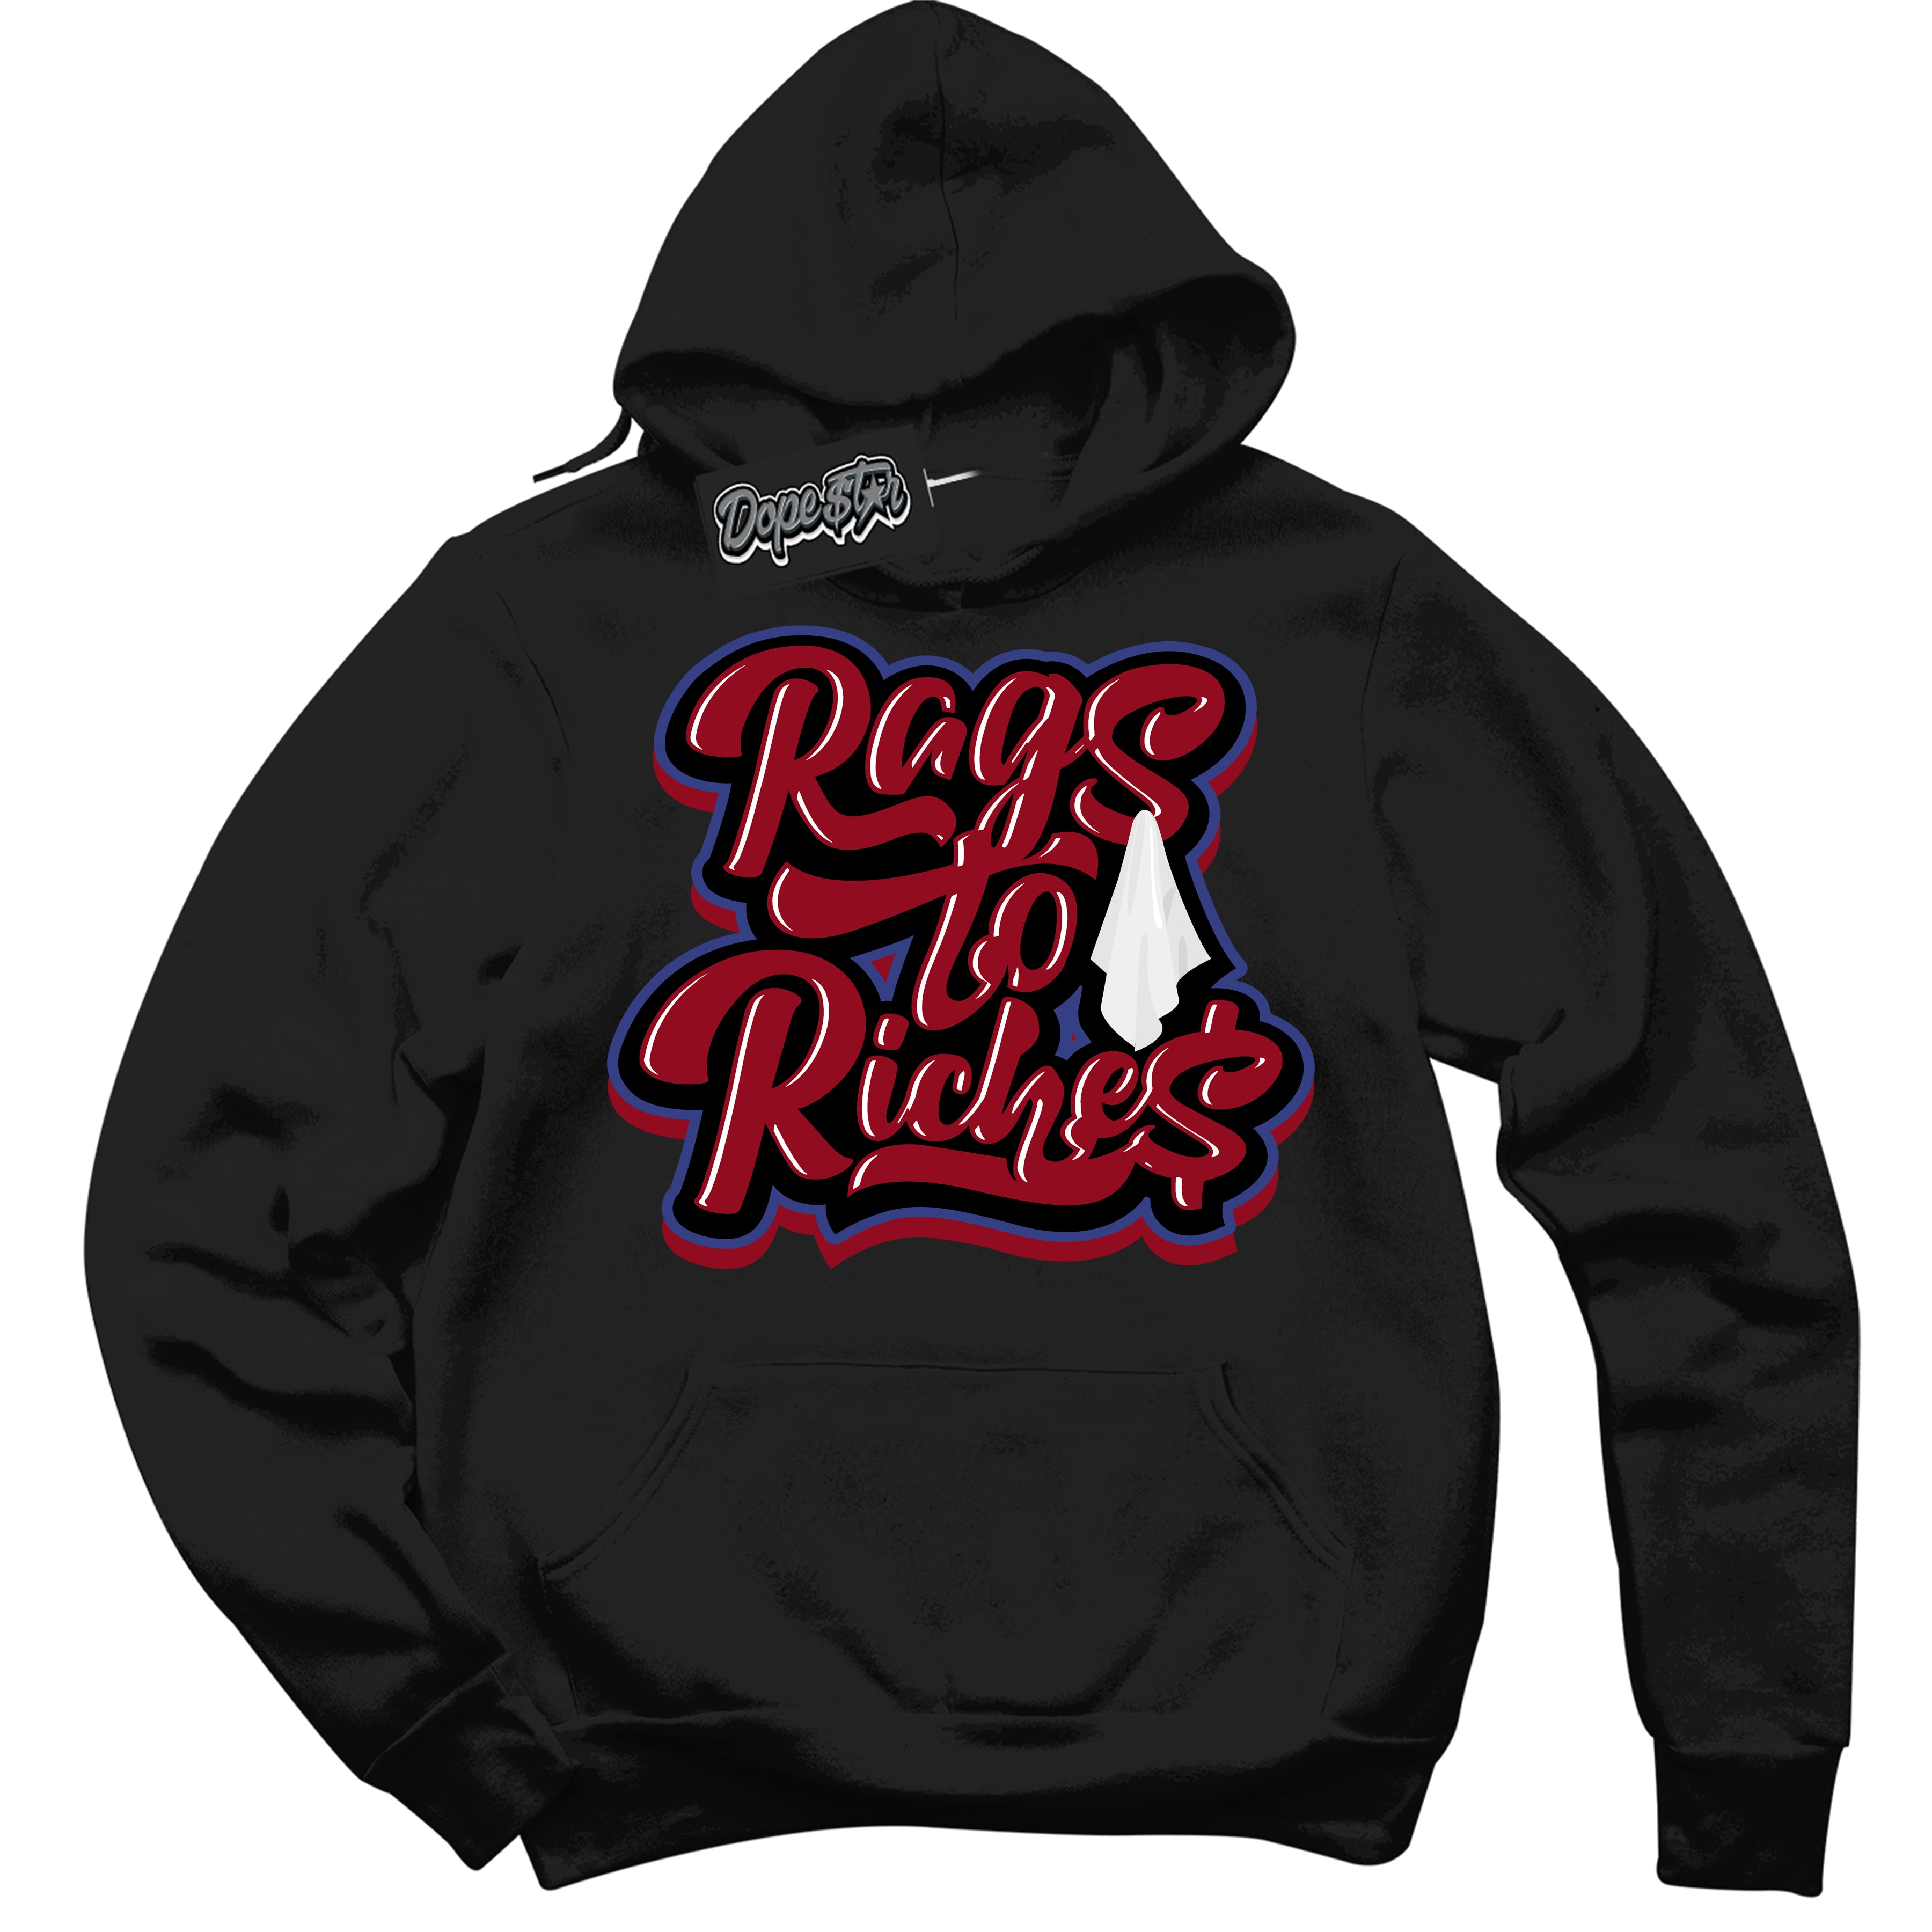 Cool Black Hoodie with “ Rags To Riches ”  design that Perfectly Matches Playoffs 8s Sneakers.